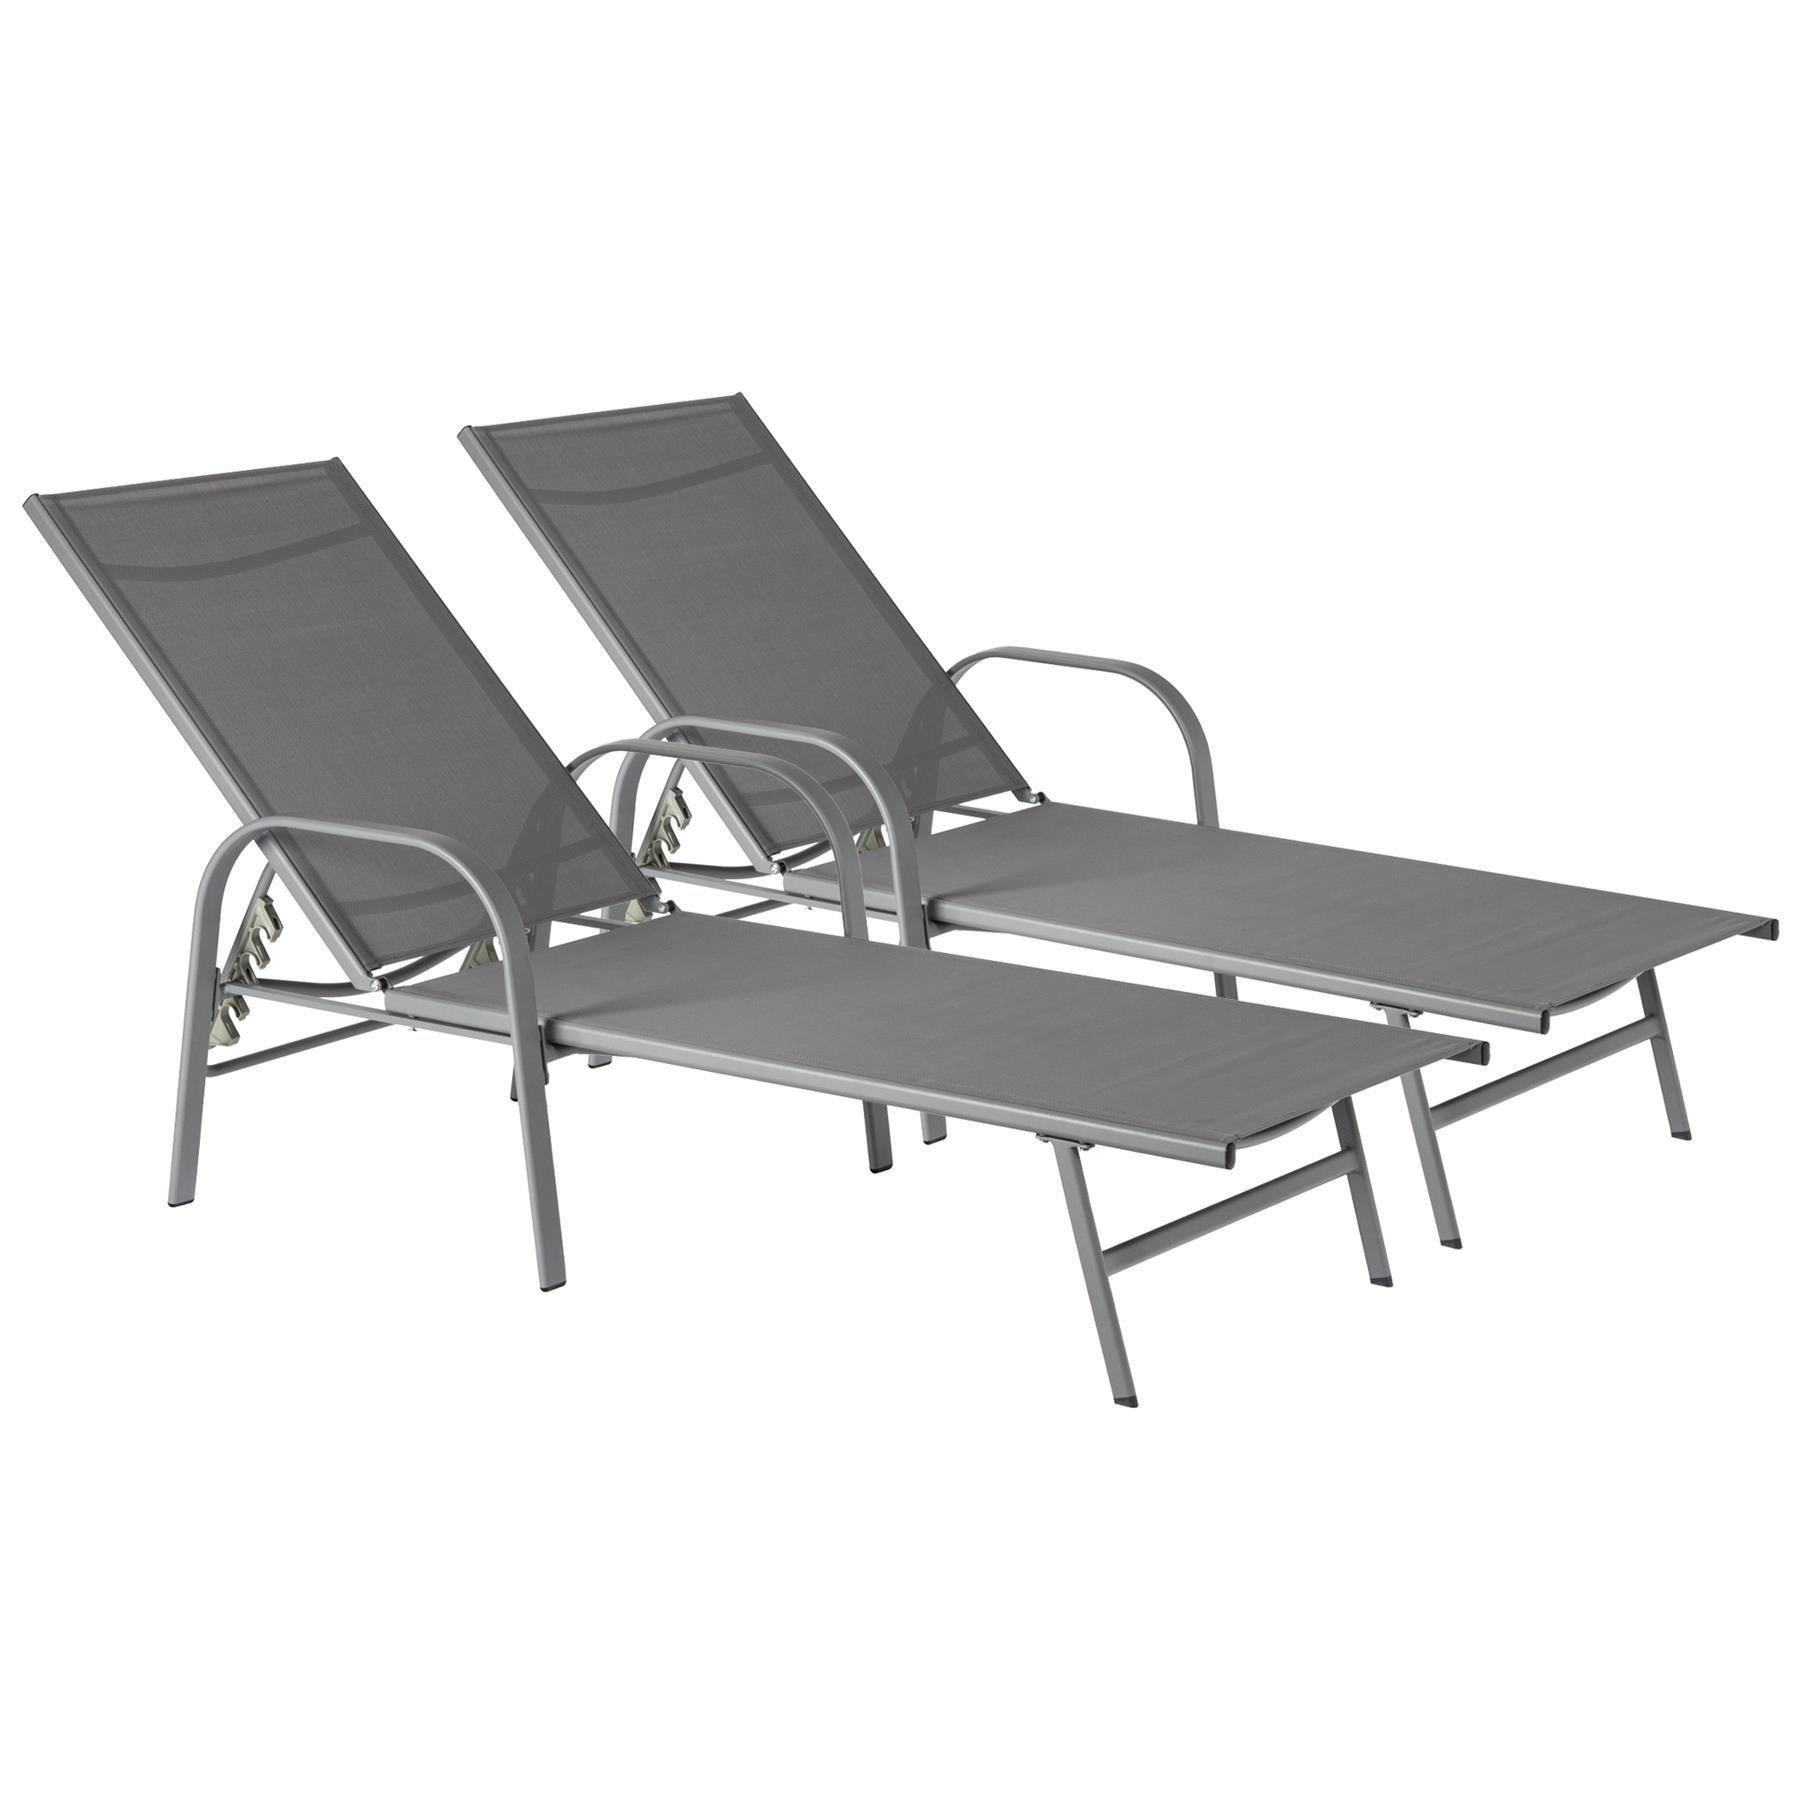 Sussex Garden Sun Lounger Bed Pack of 2 - image 1